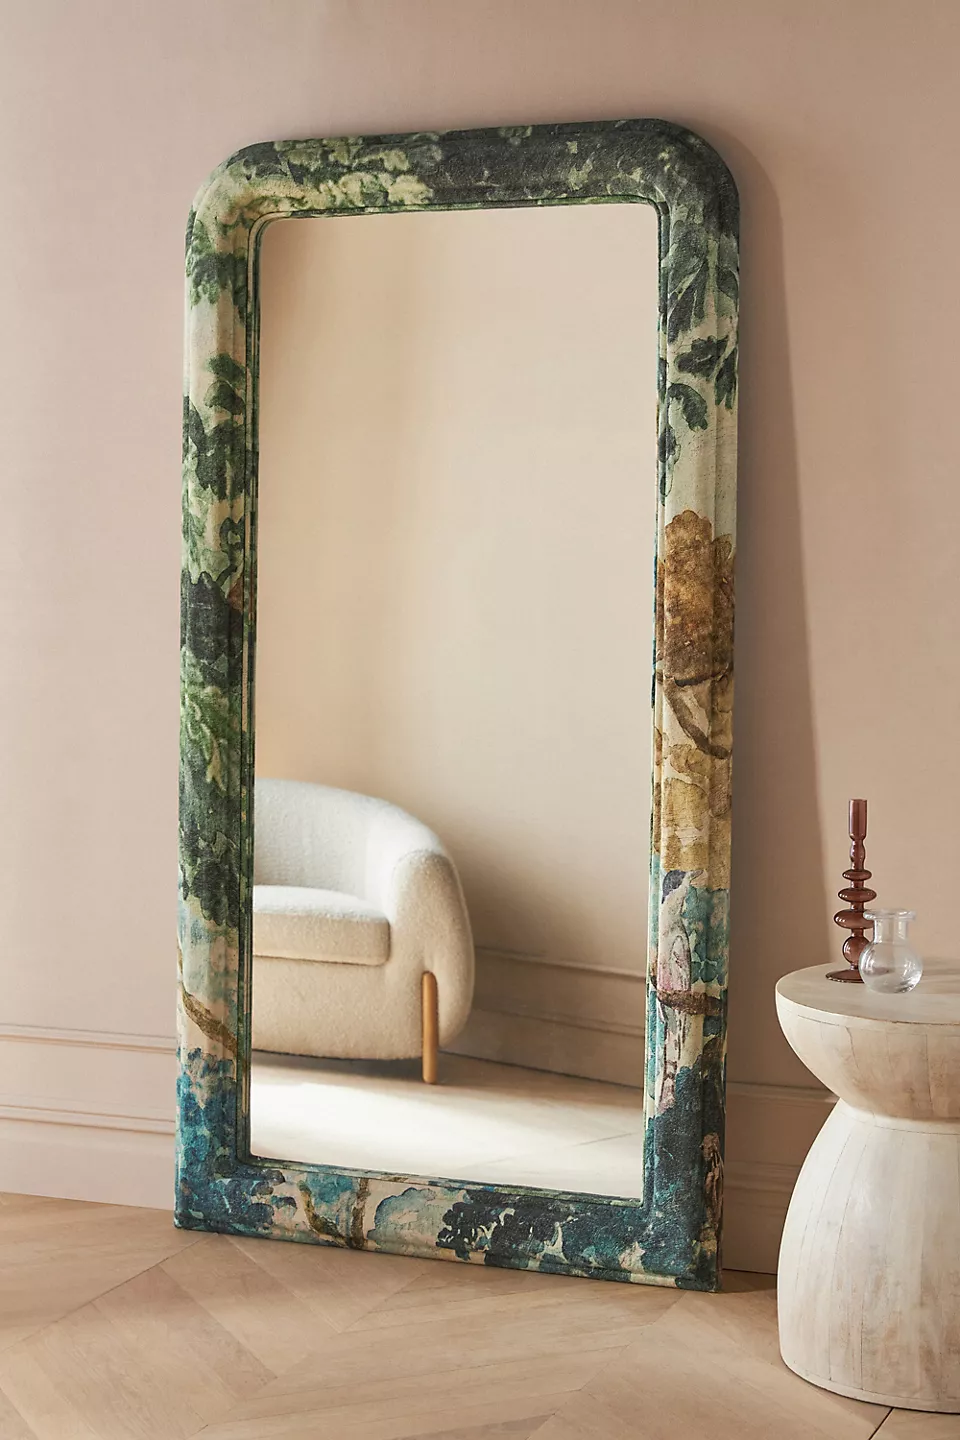 Reflective Charm: Adorn Your Space with Floor Mirror Designs